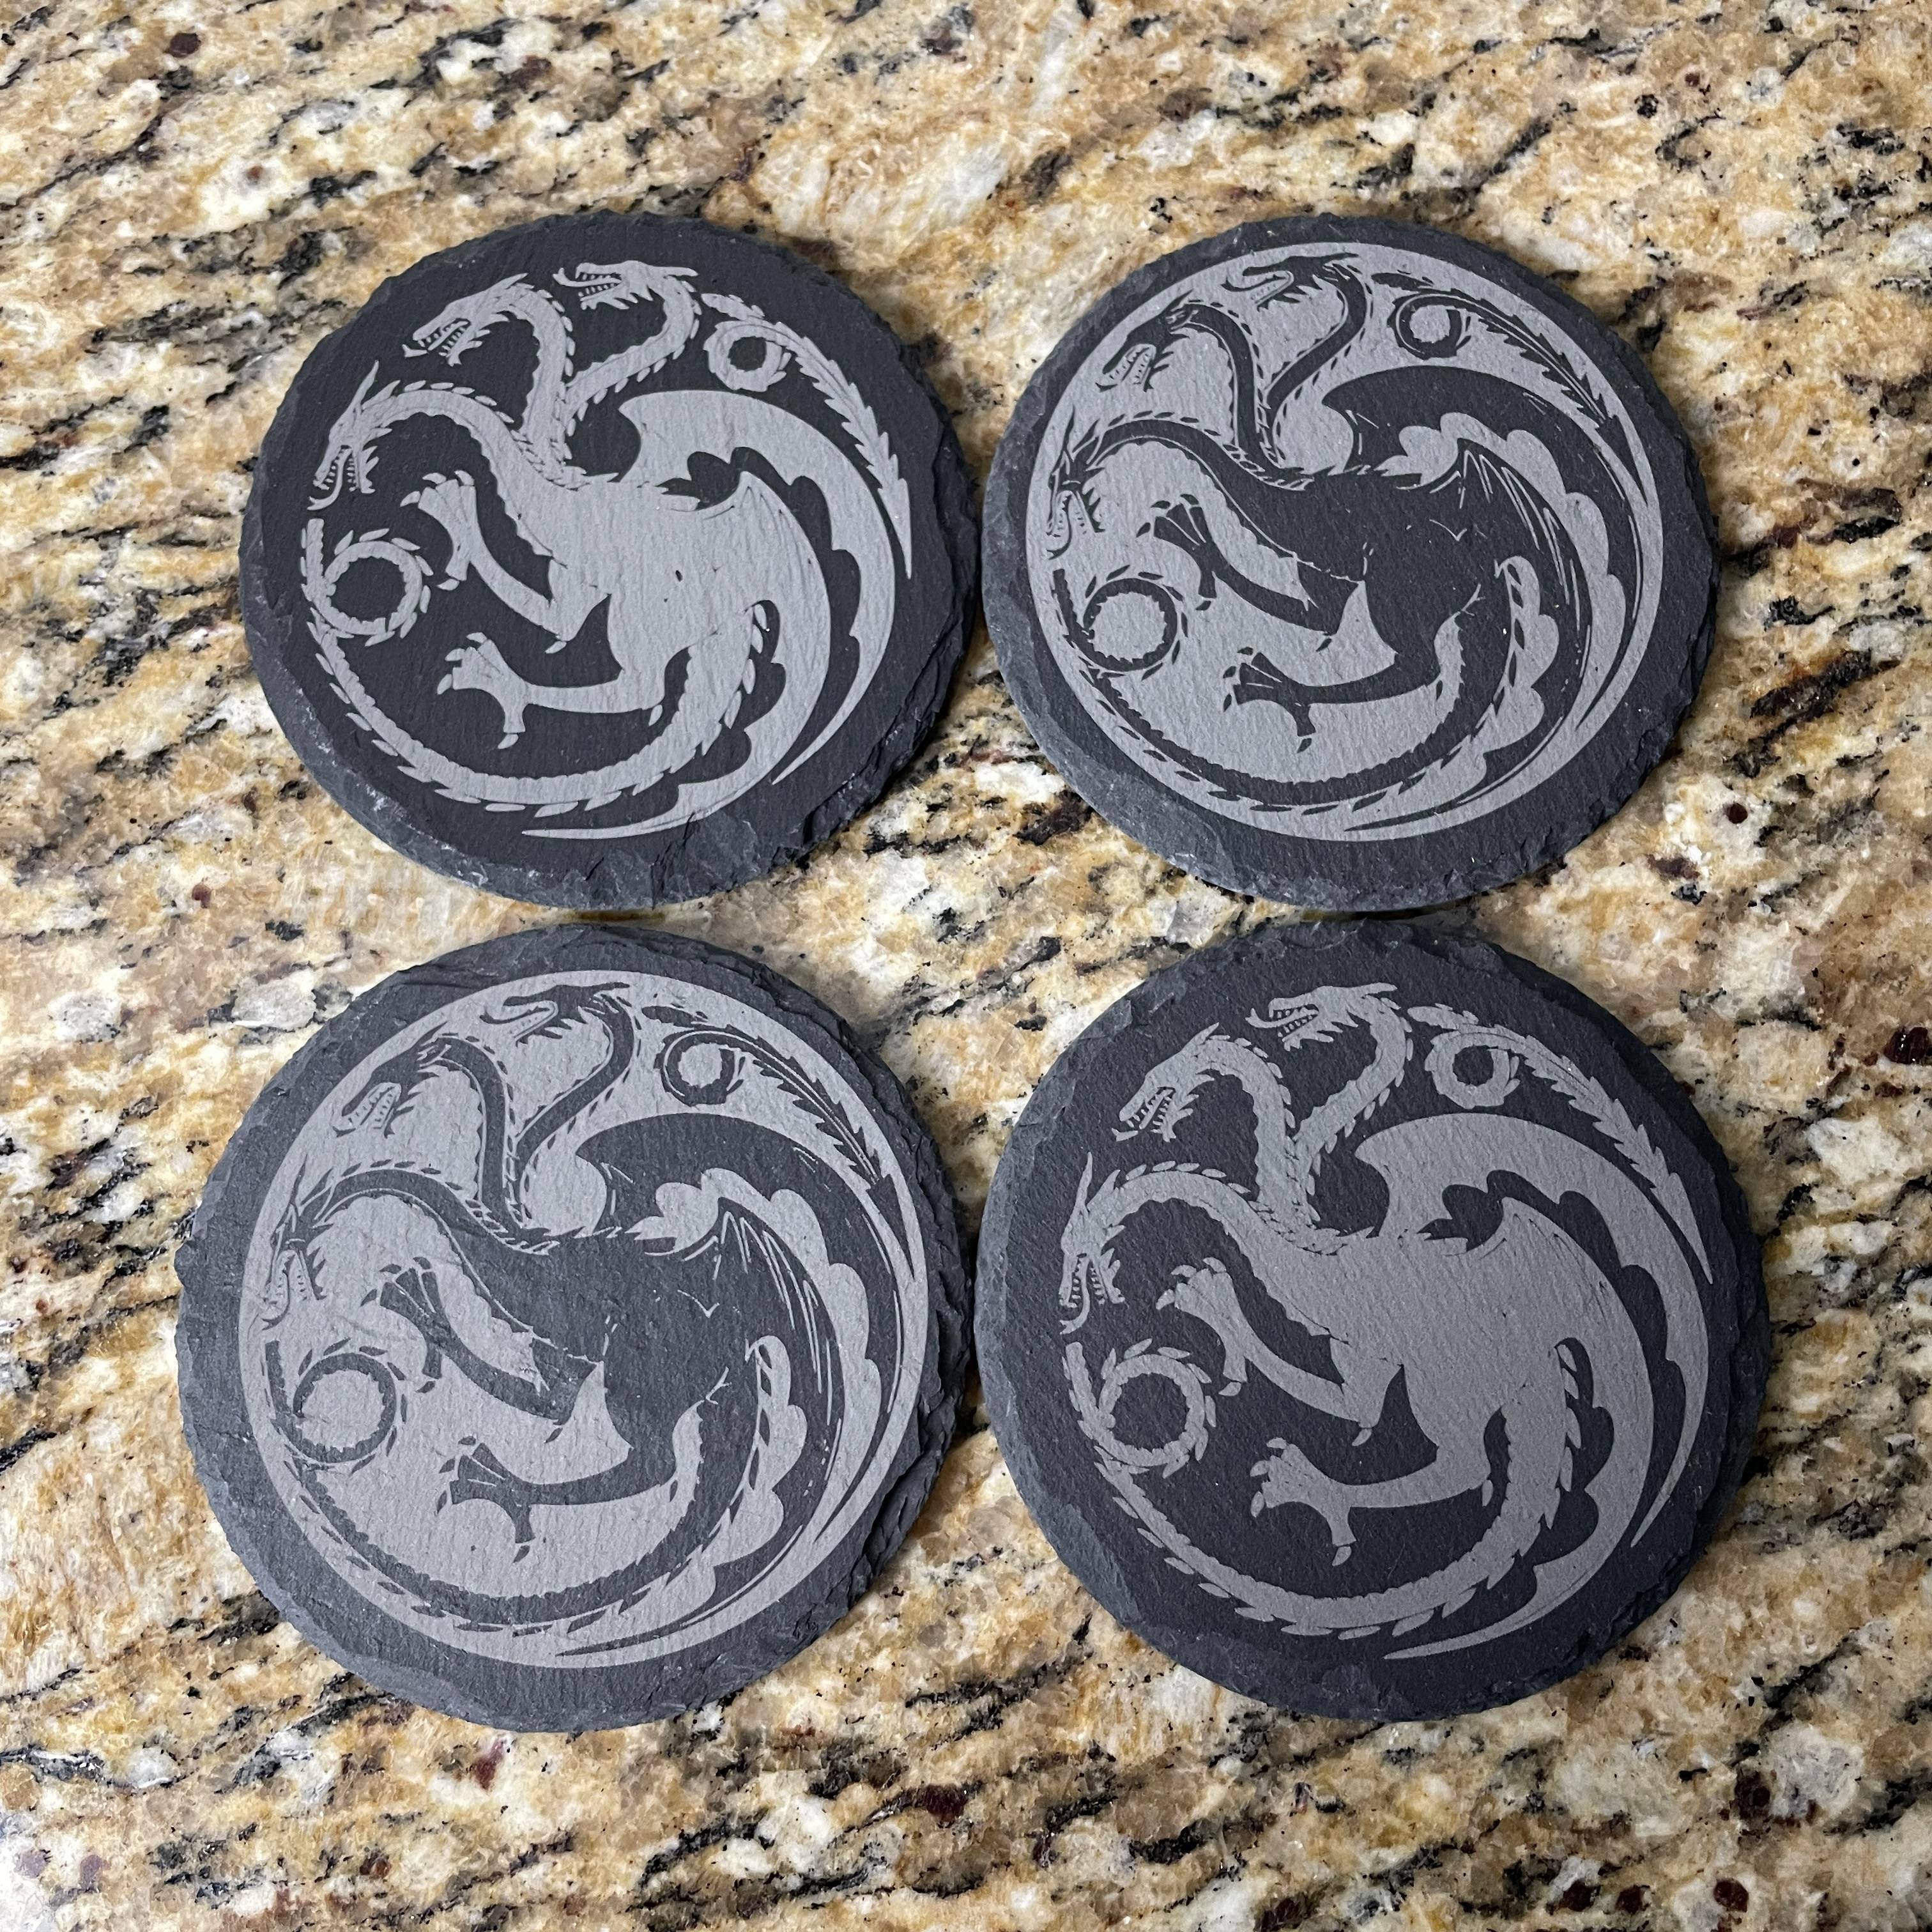 Dragon Inspired Slate Coasters:  Enhance Your Table with Iconic Dragon Design